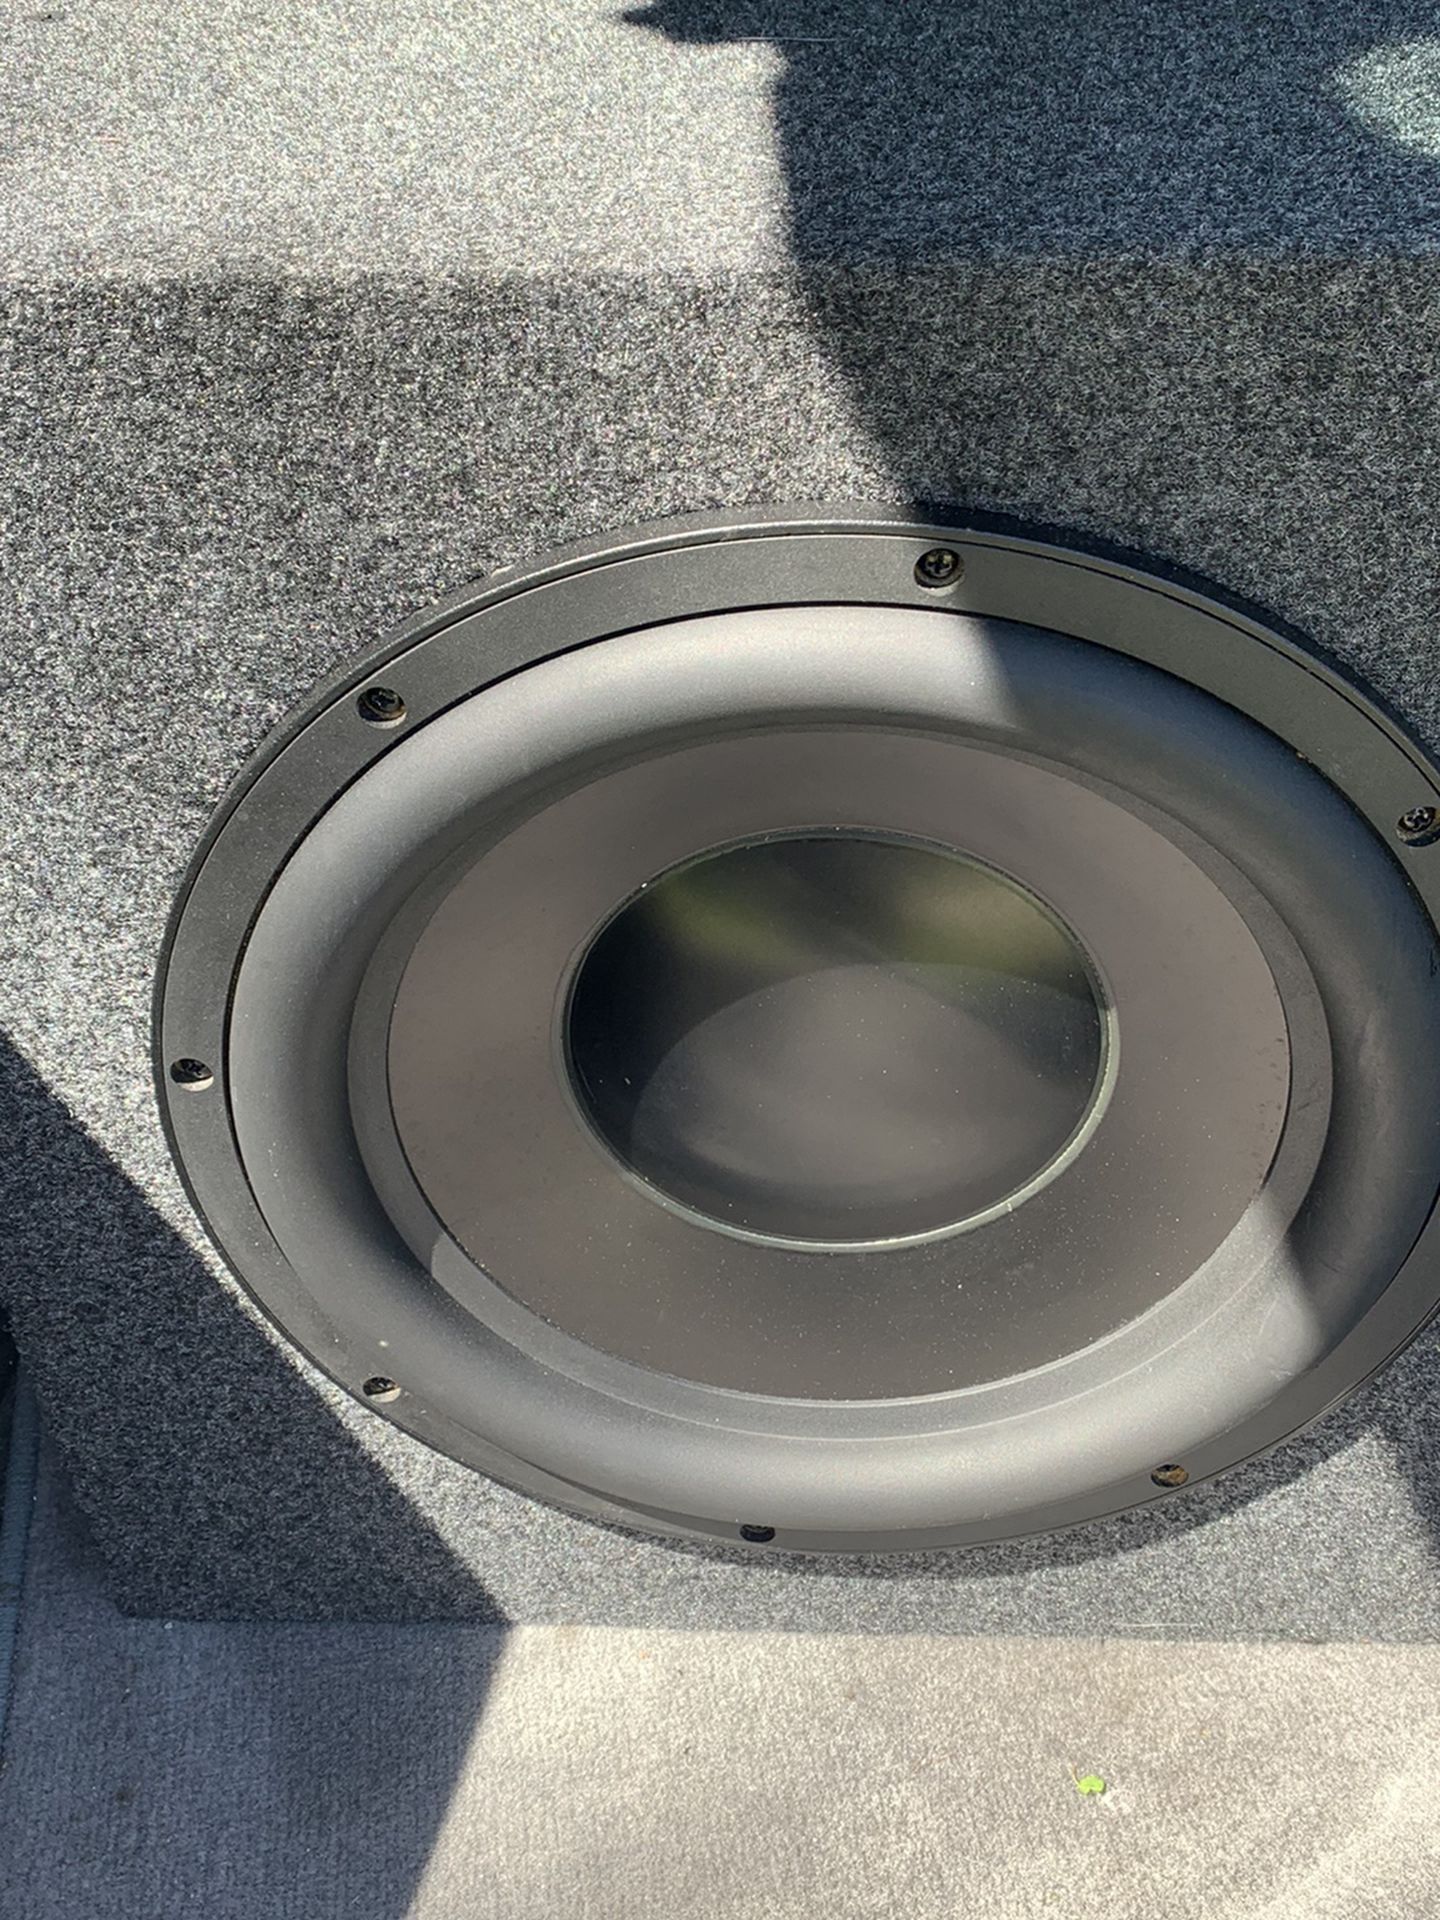 12 Inch Dayton Audio Subwoofer And Tma 1000.1 Amplifier